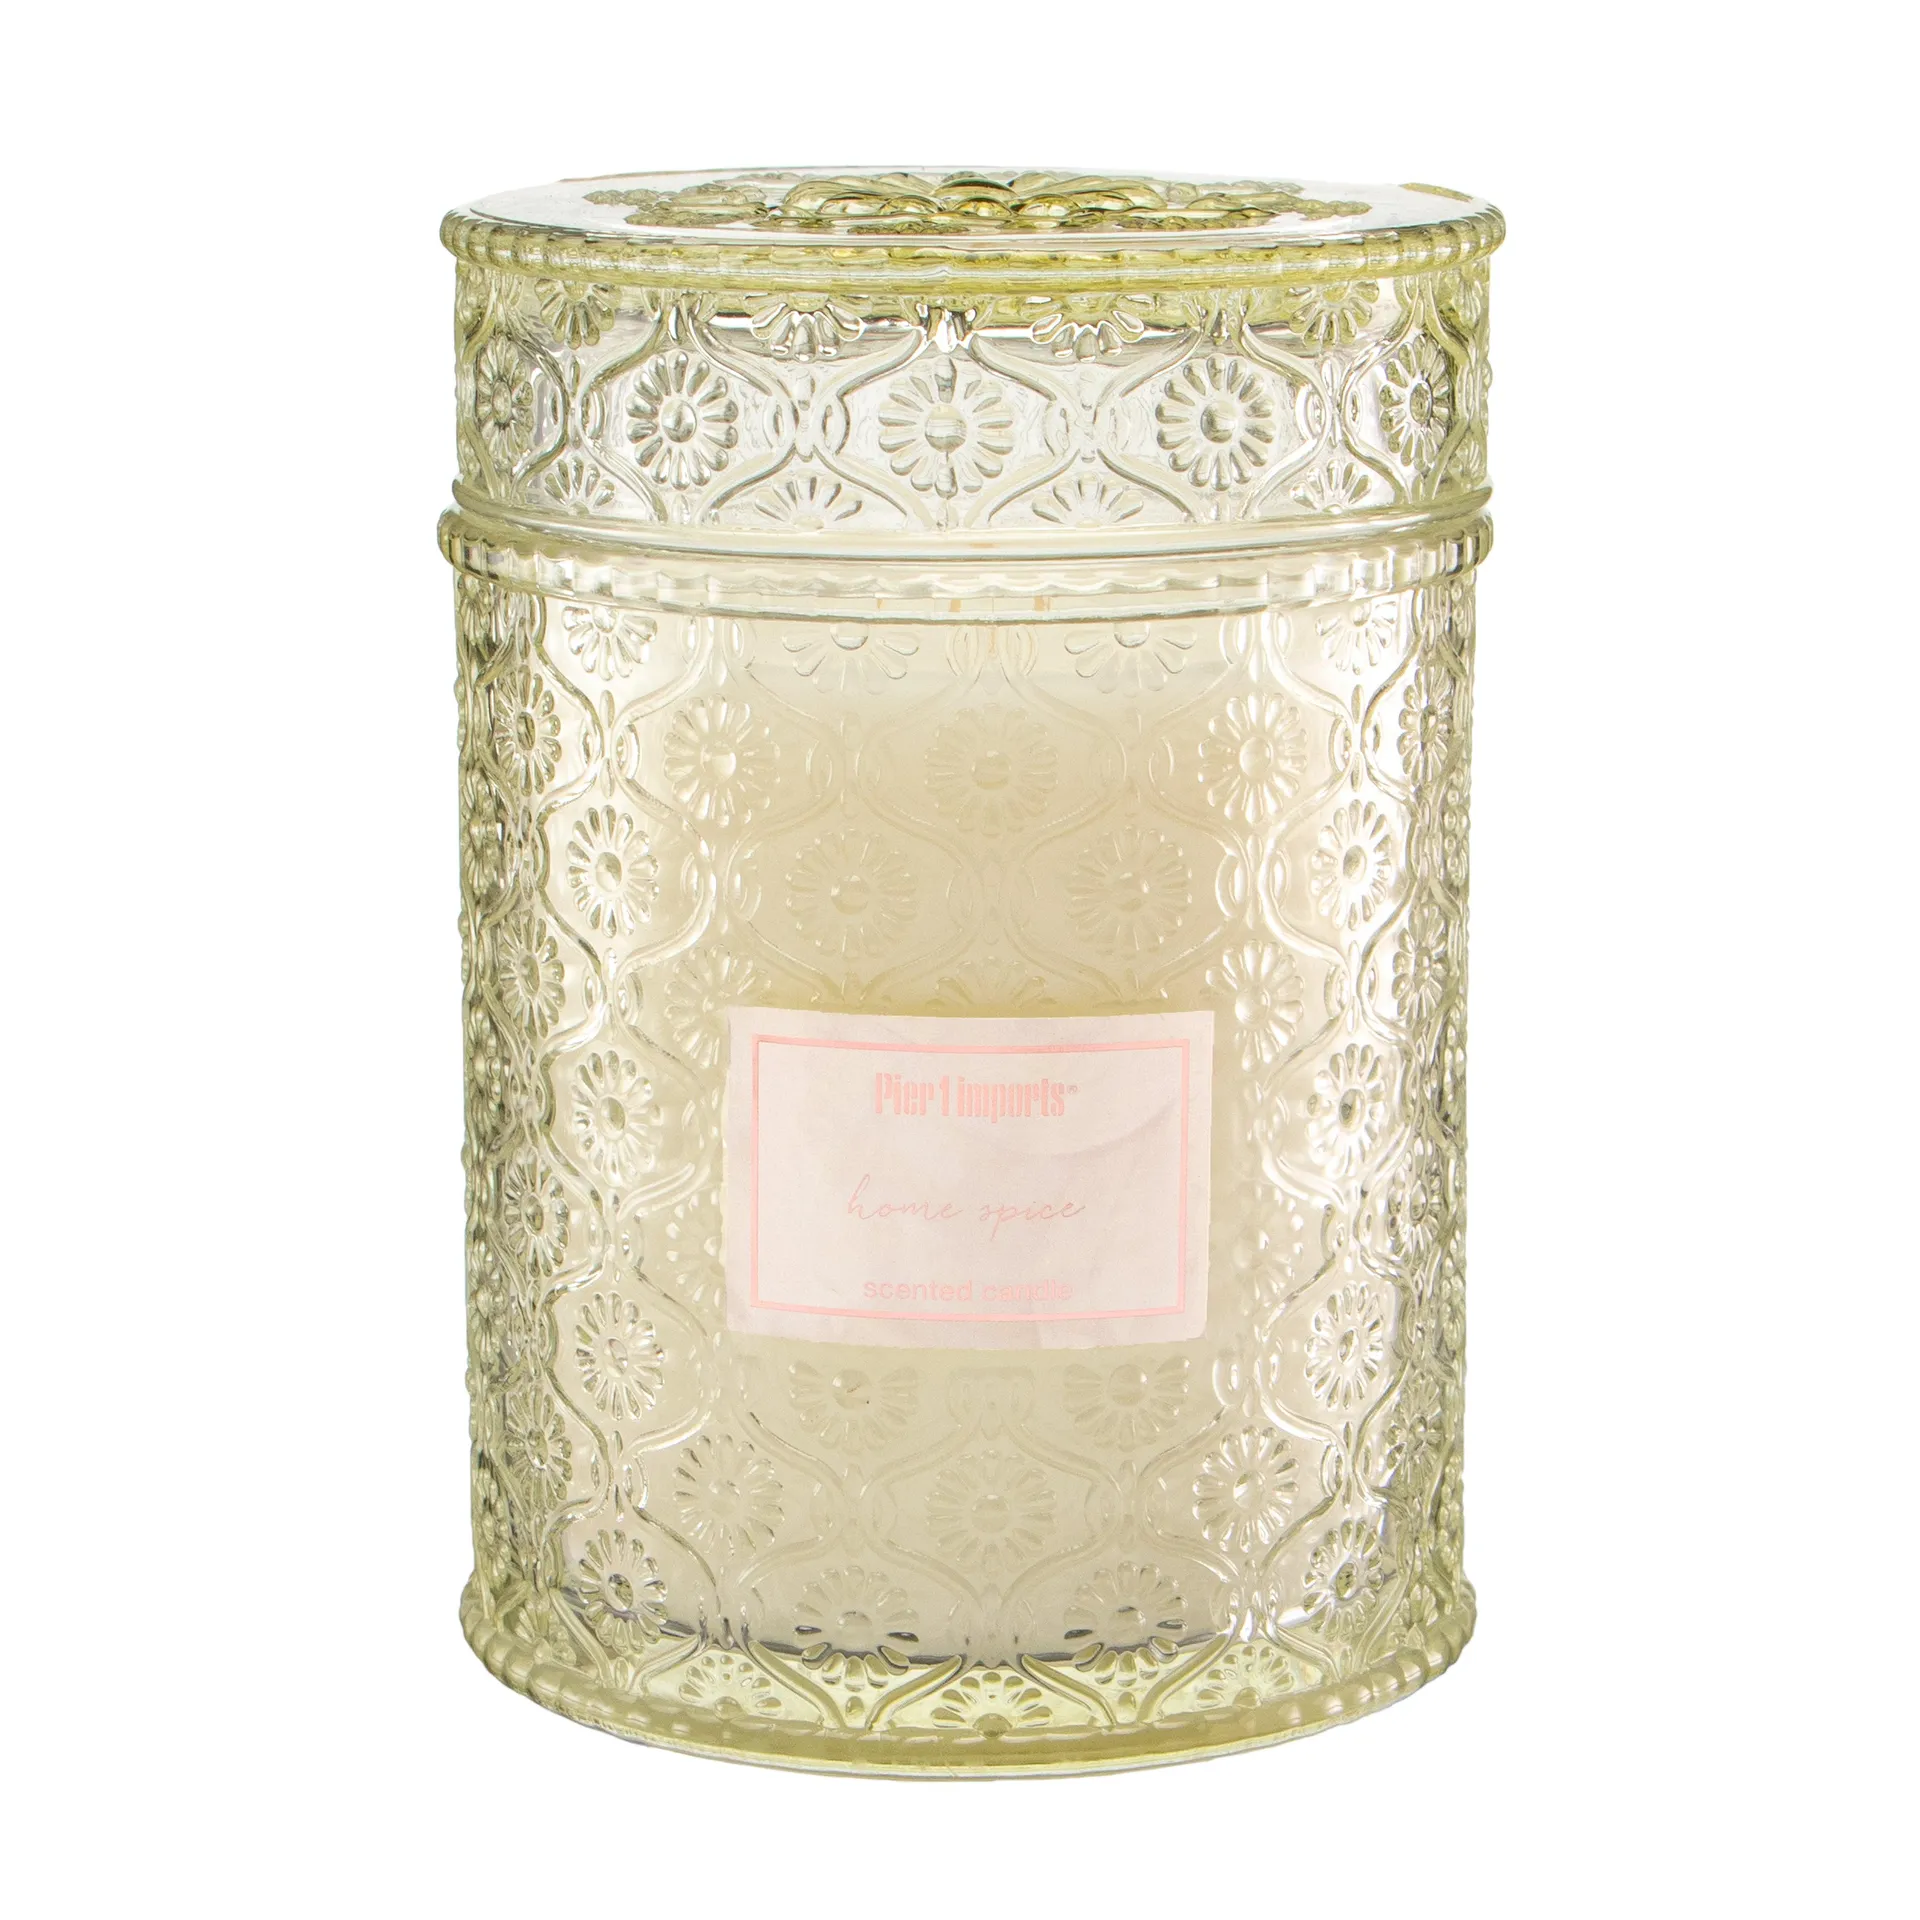 Pier 1 Home Spice Luxe 19oz Filled Candle